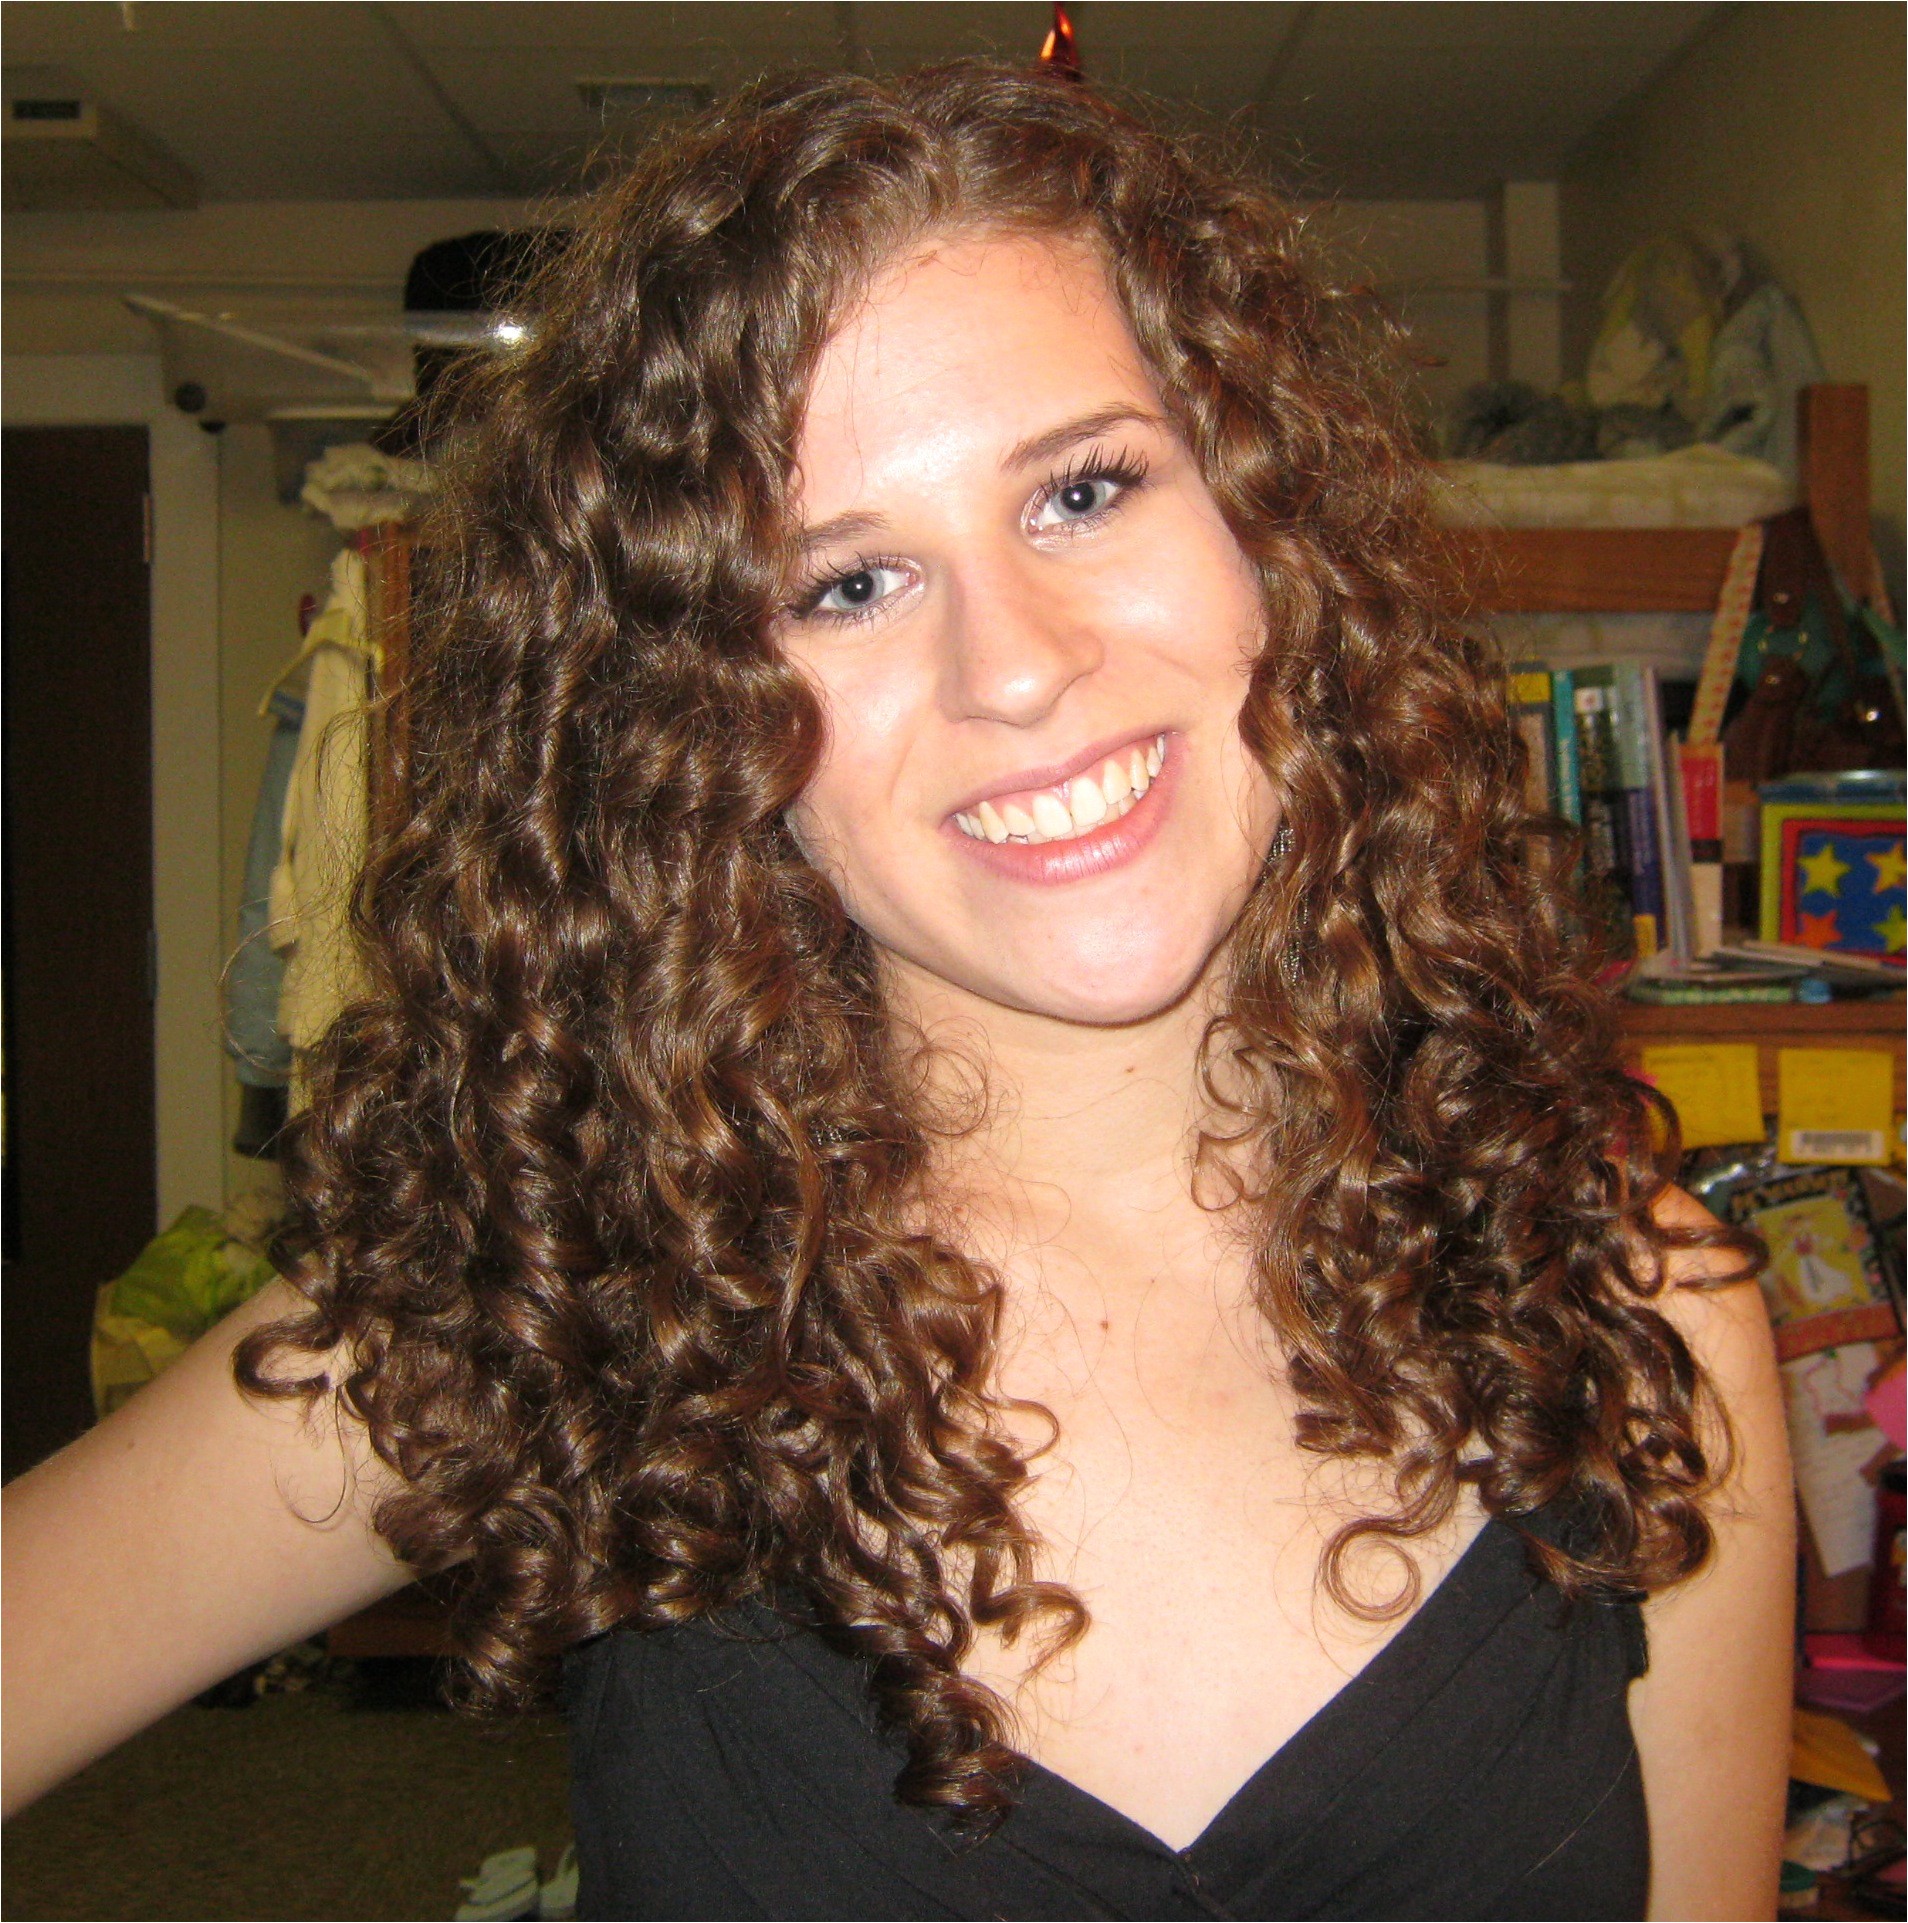 Braided Hairstyles for Curly Hair Lovely Curly Hairstyles Luxury Very Curly Hairstyles Fresh Curly Hair 0d